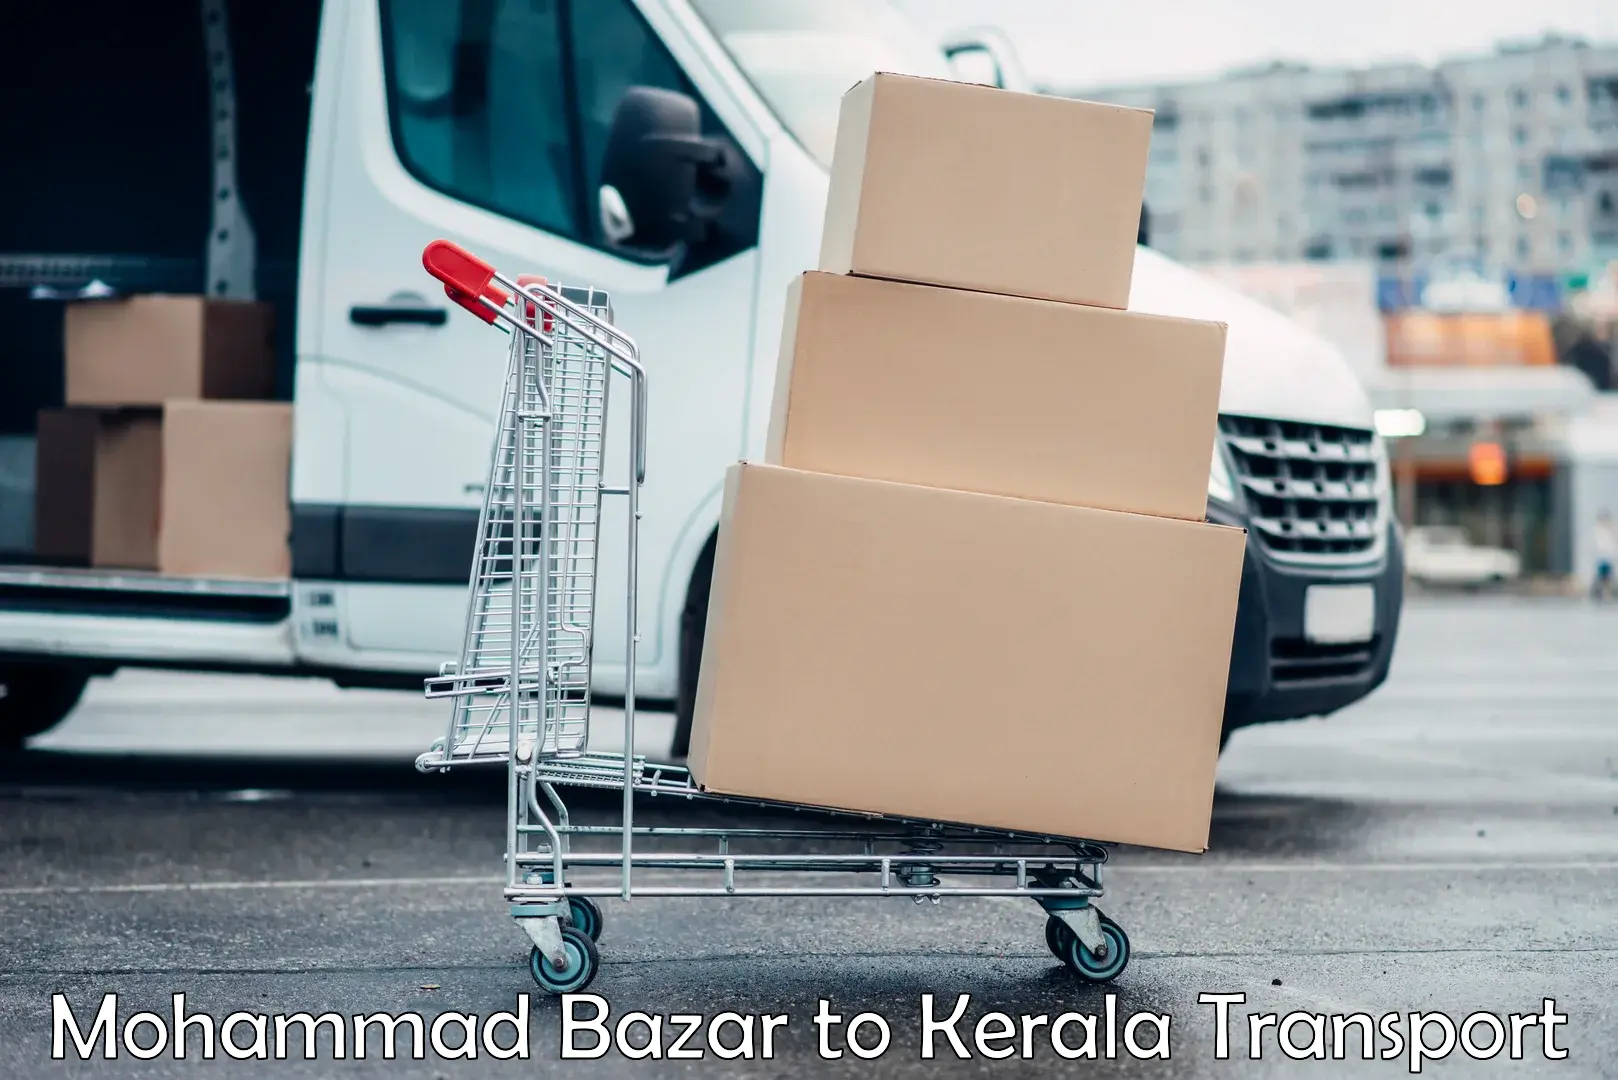 Transport bike from one state to another Mohammad Bazar to Kerala